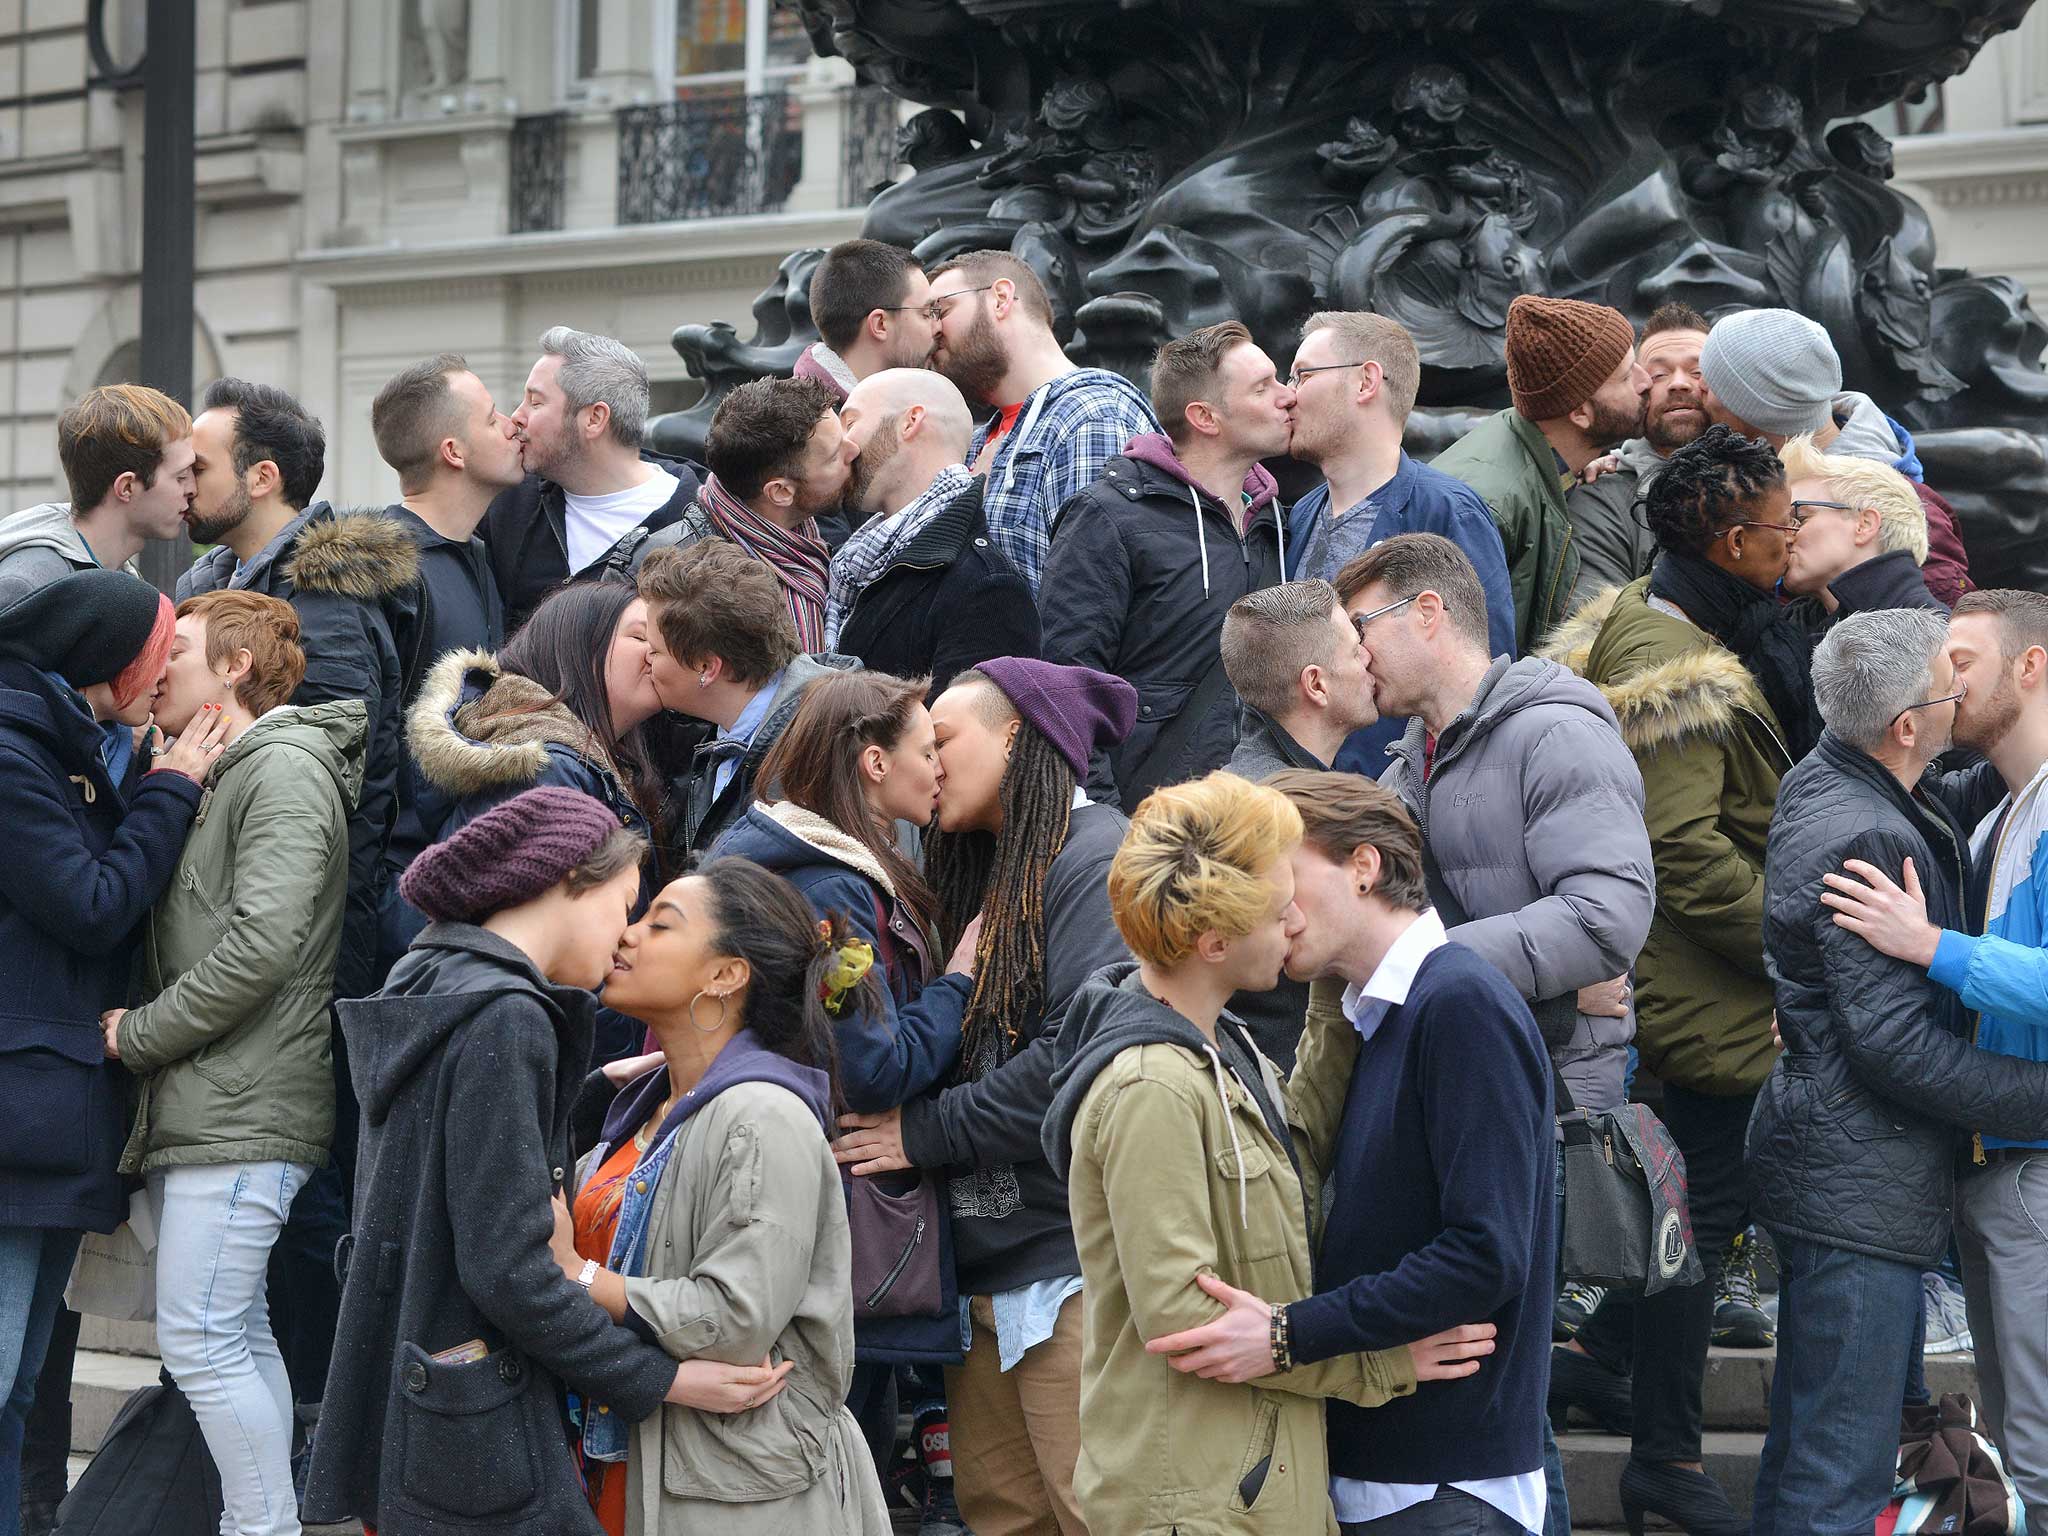 Crowds gather beneath the Eros Fountain in London